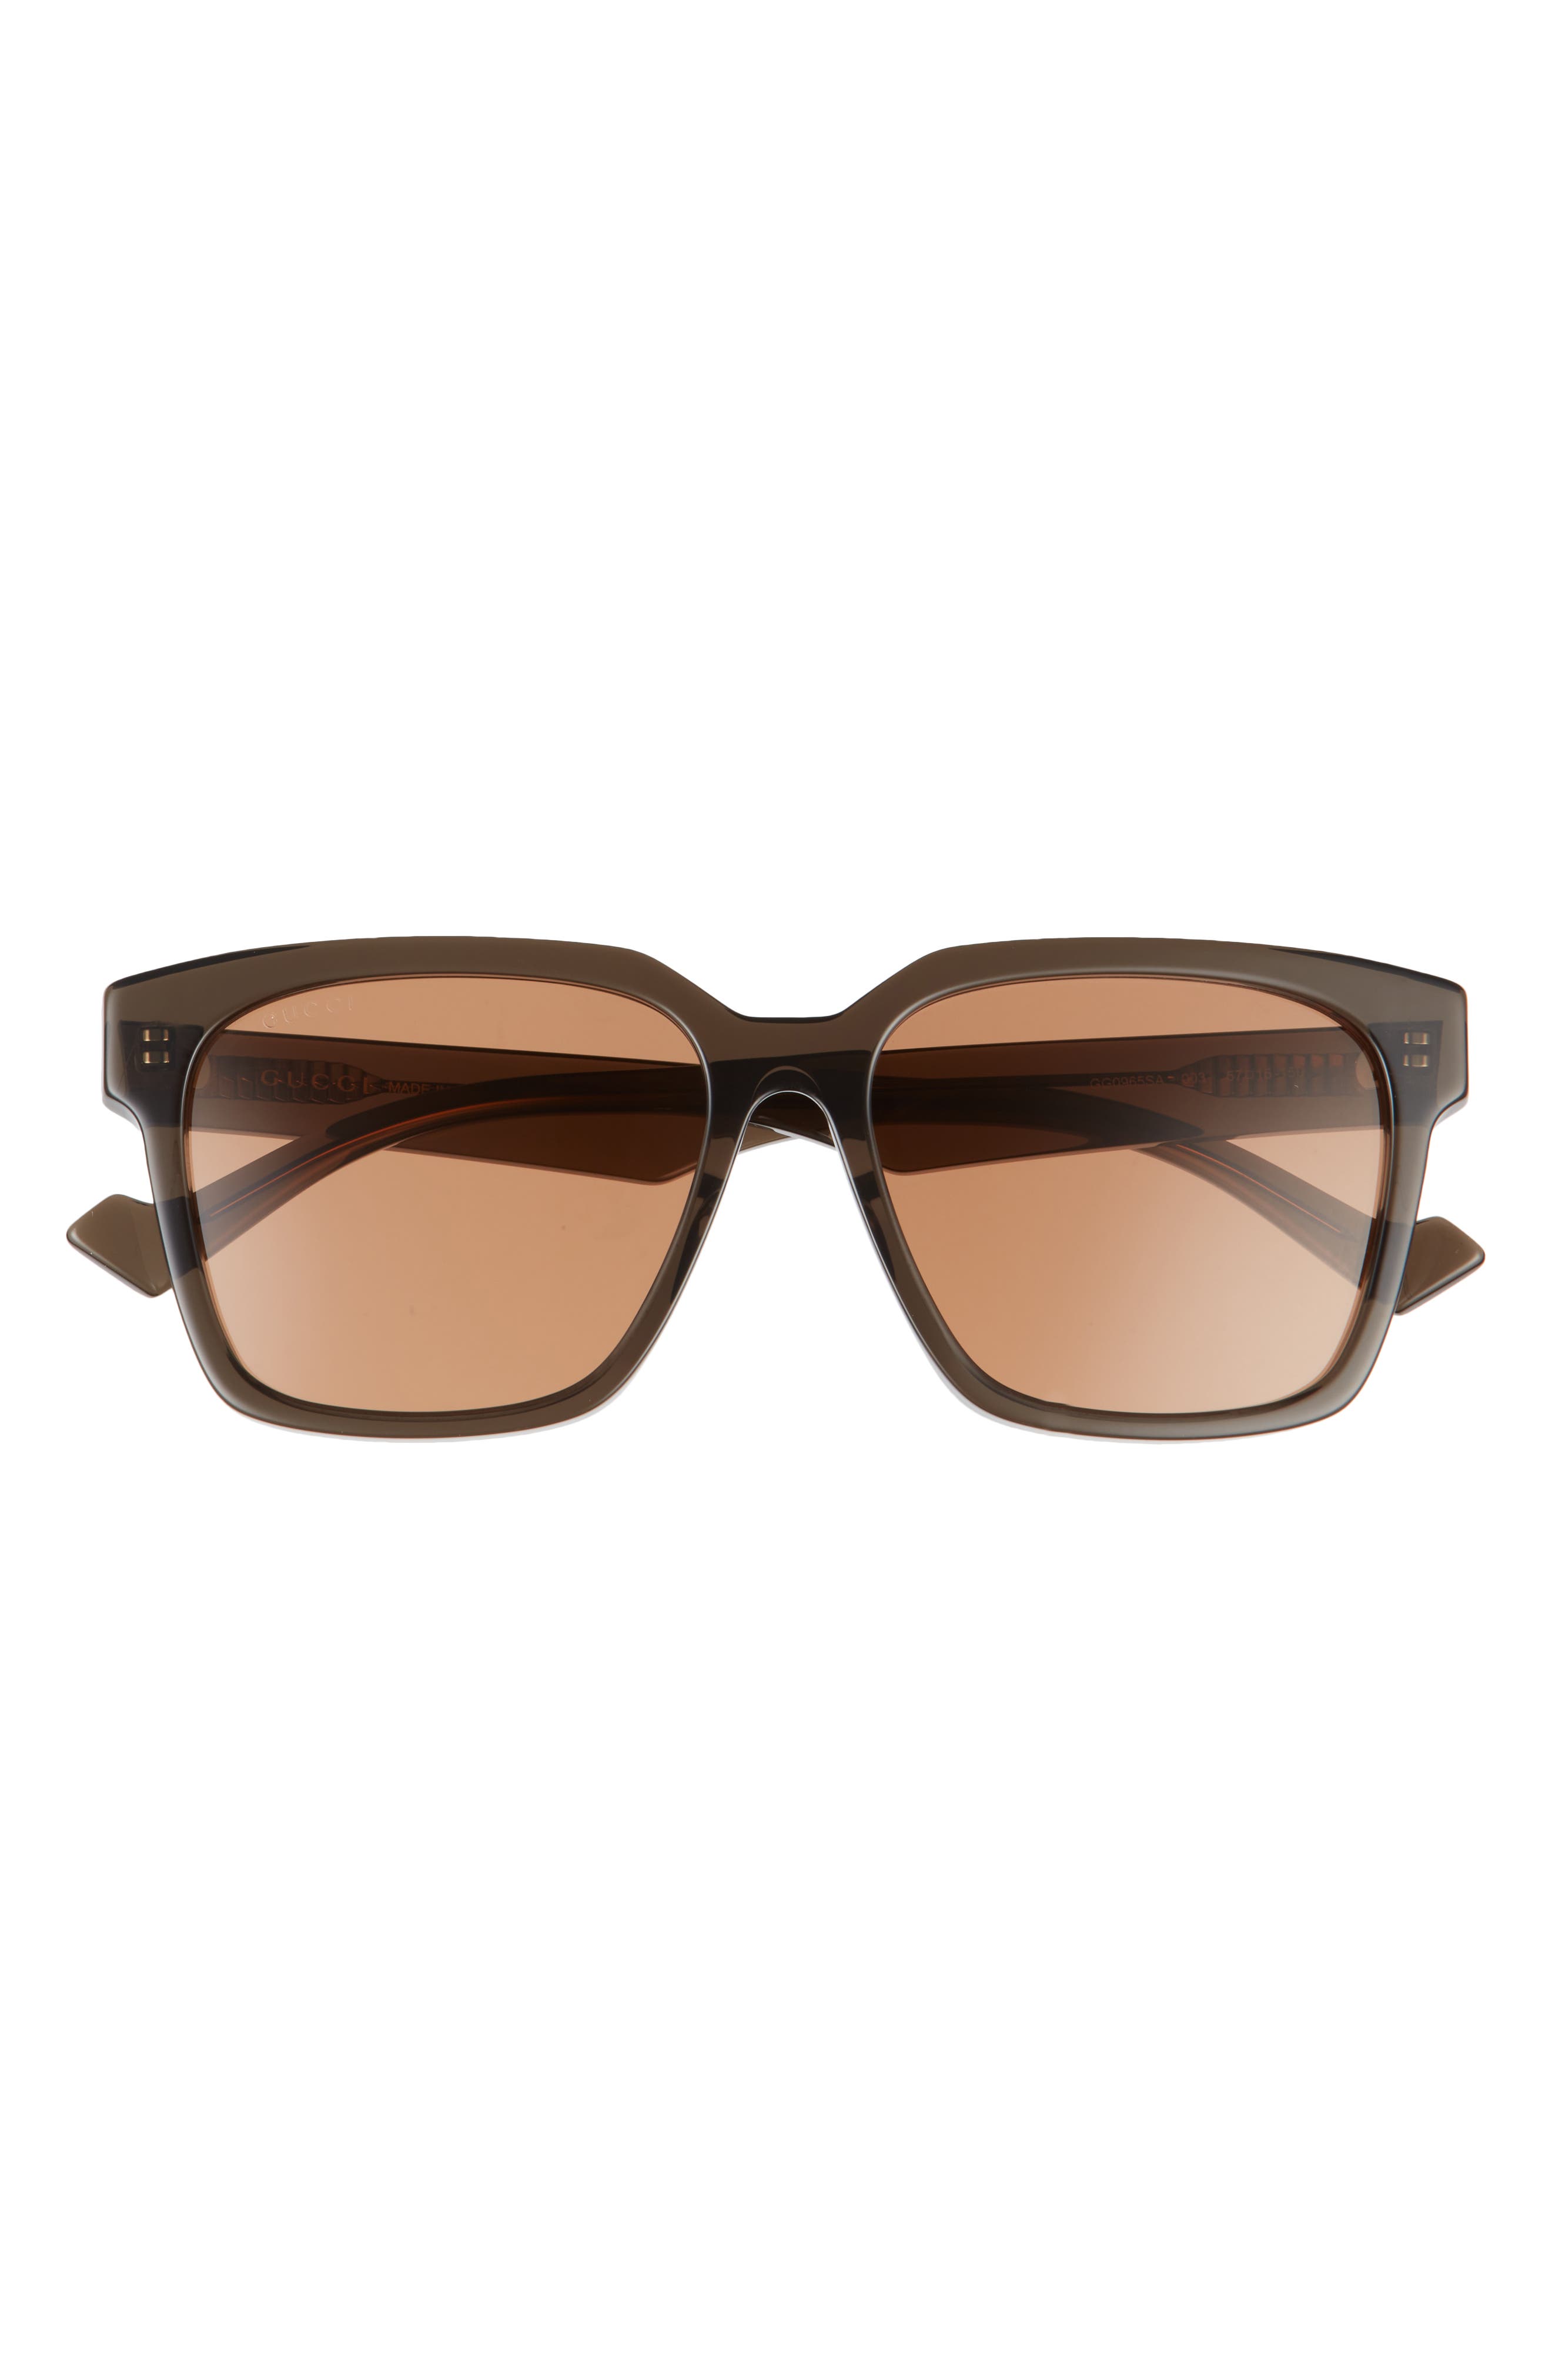 Gucci 57mm Square Sunglasses in Brown/Brown at Nordstrom